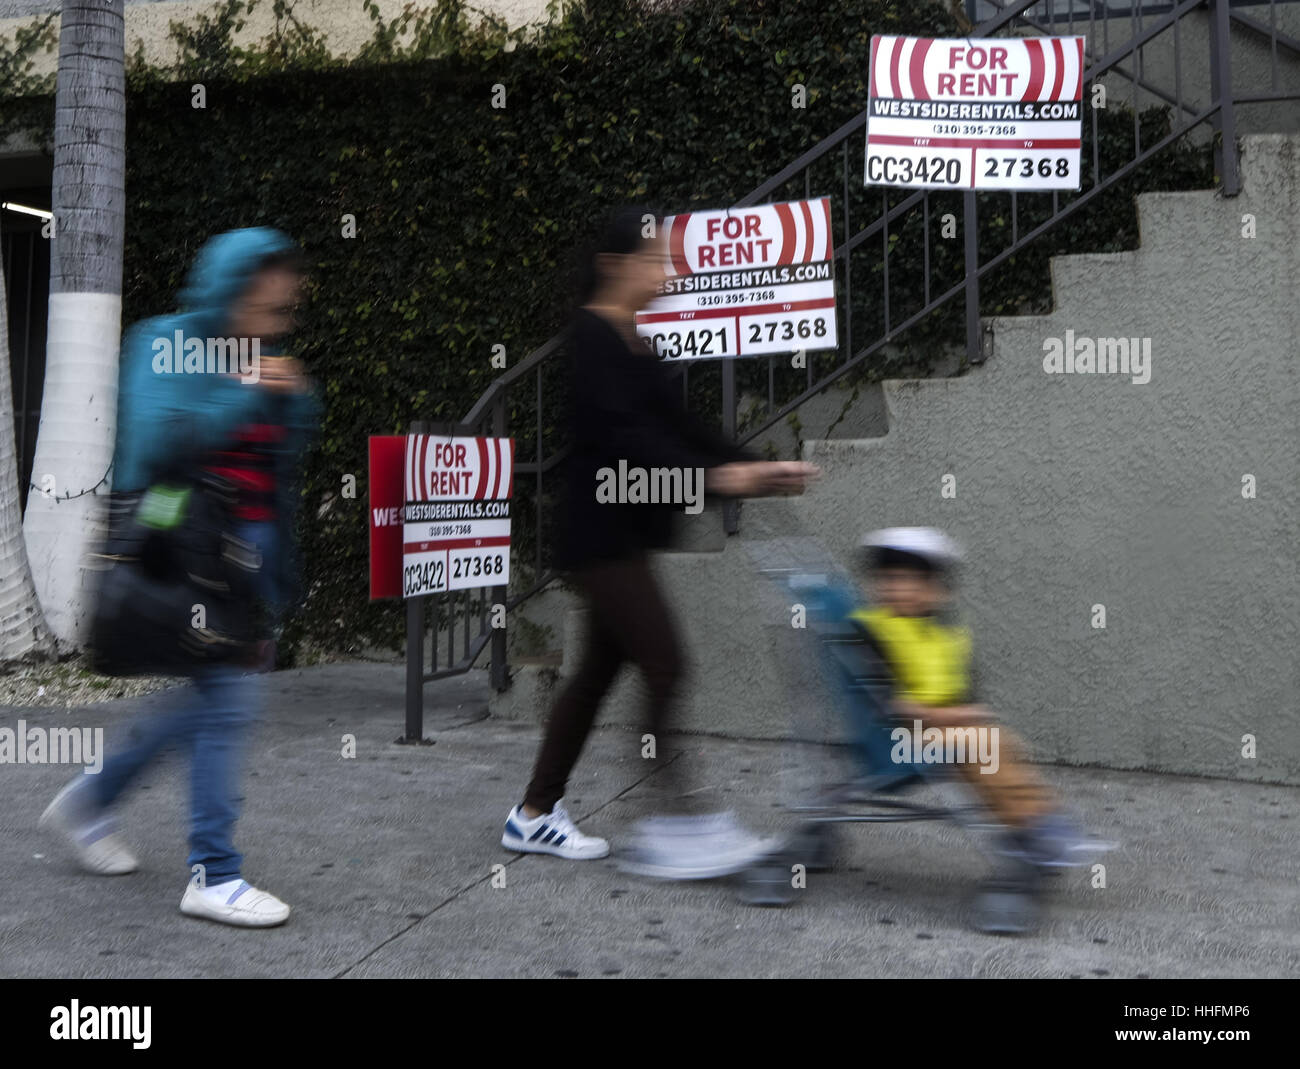 Los Angeles, USA. 18th Jan, 2017. Rental signs are seen outside a property in Los Angeles. Rents hit a new multiyear high in December as limited supply and high demand pushed costs higher, the U.S. Department of Labor reported today. Rents rose 4 percent, the strongest yearly gain since December 2007, the month the Great Recession began, compared to December 2015, the department said. Rents are appreciating at a high pace, particularly on the West Coast. Credit: ZUMA Press, Inc./Alamy Live News Stock Photo